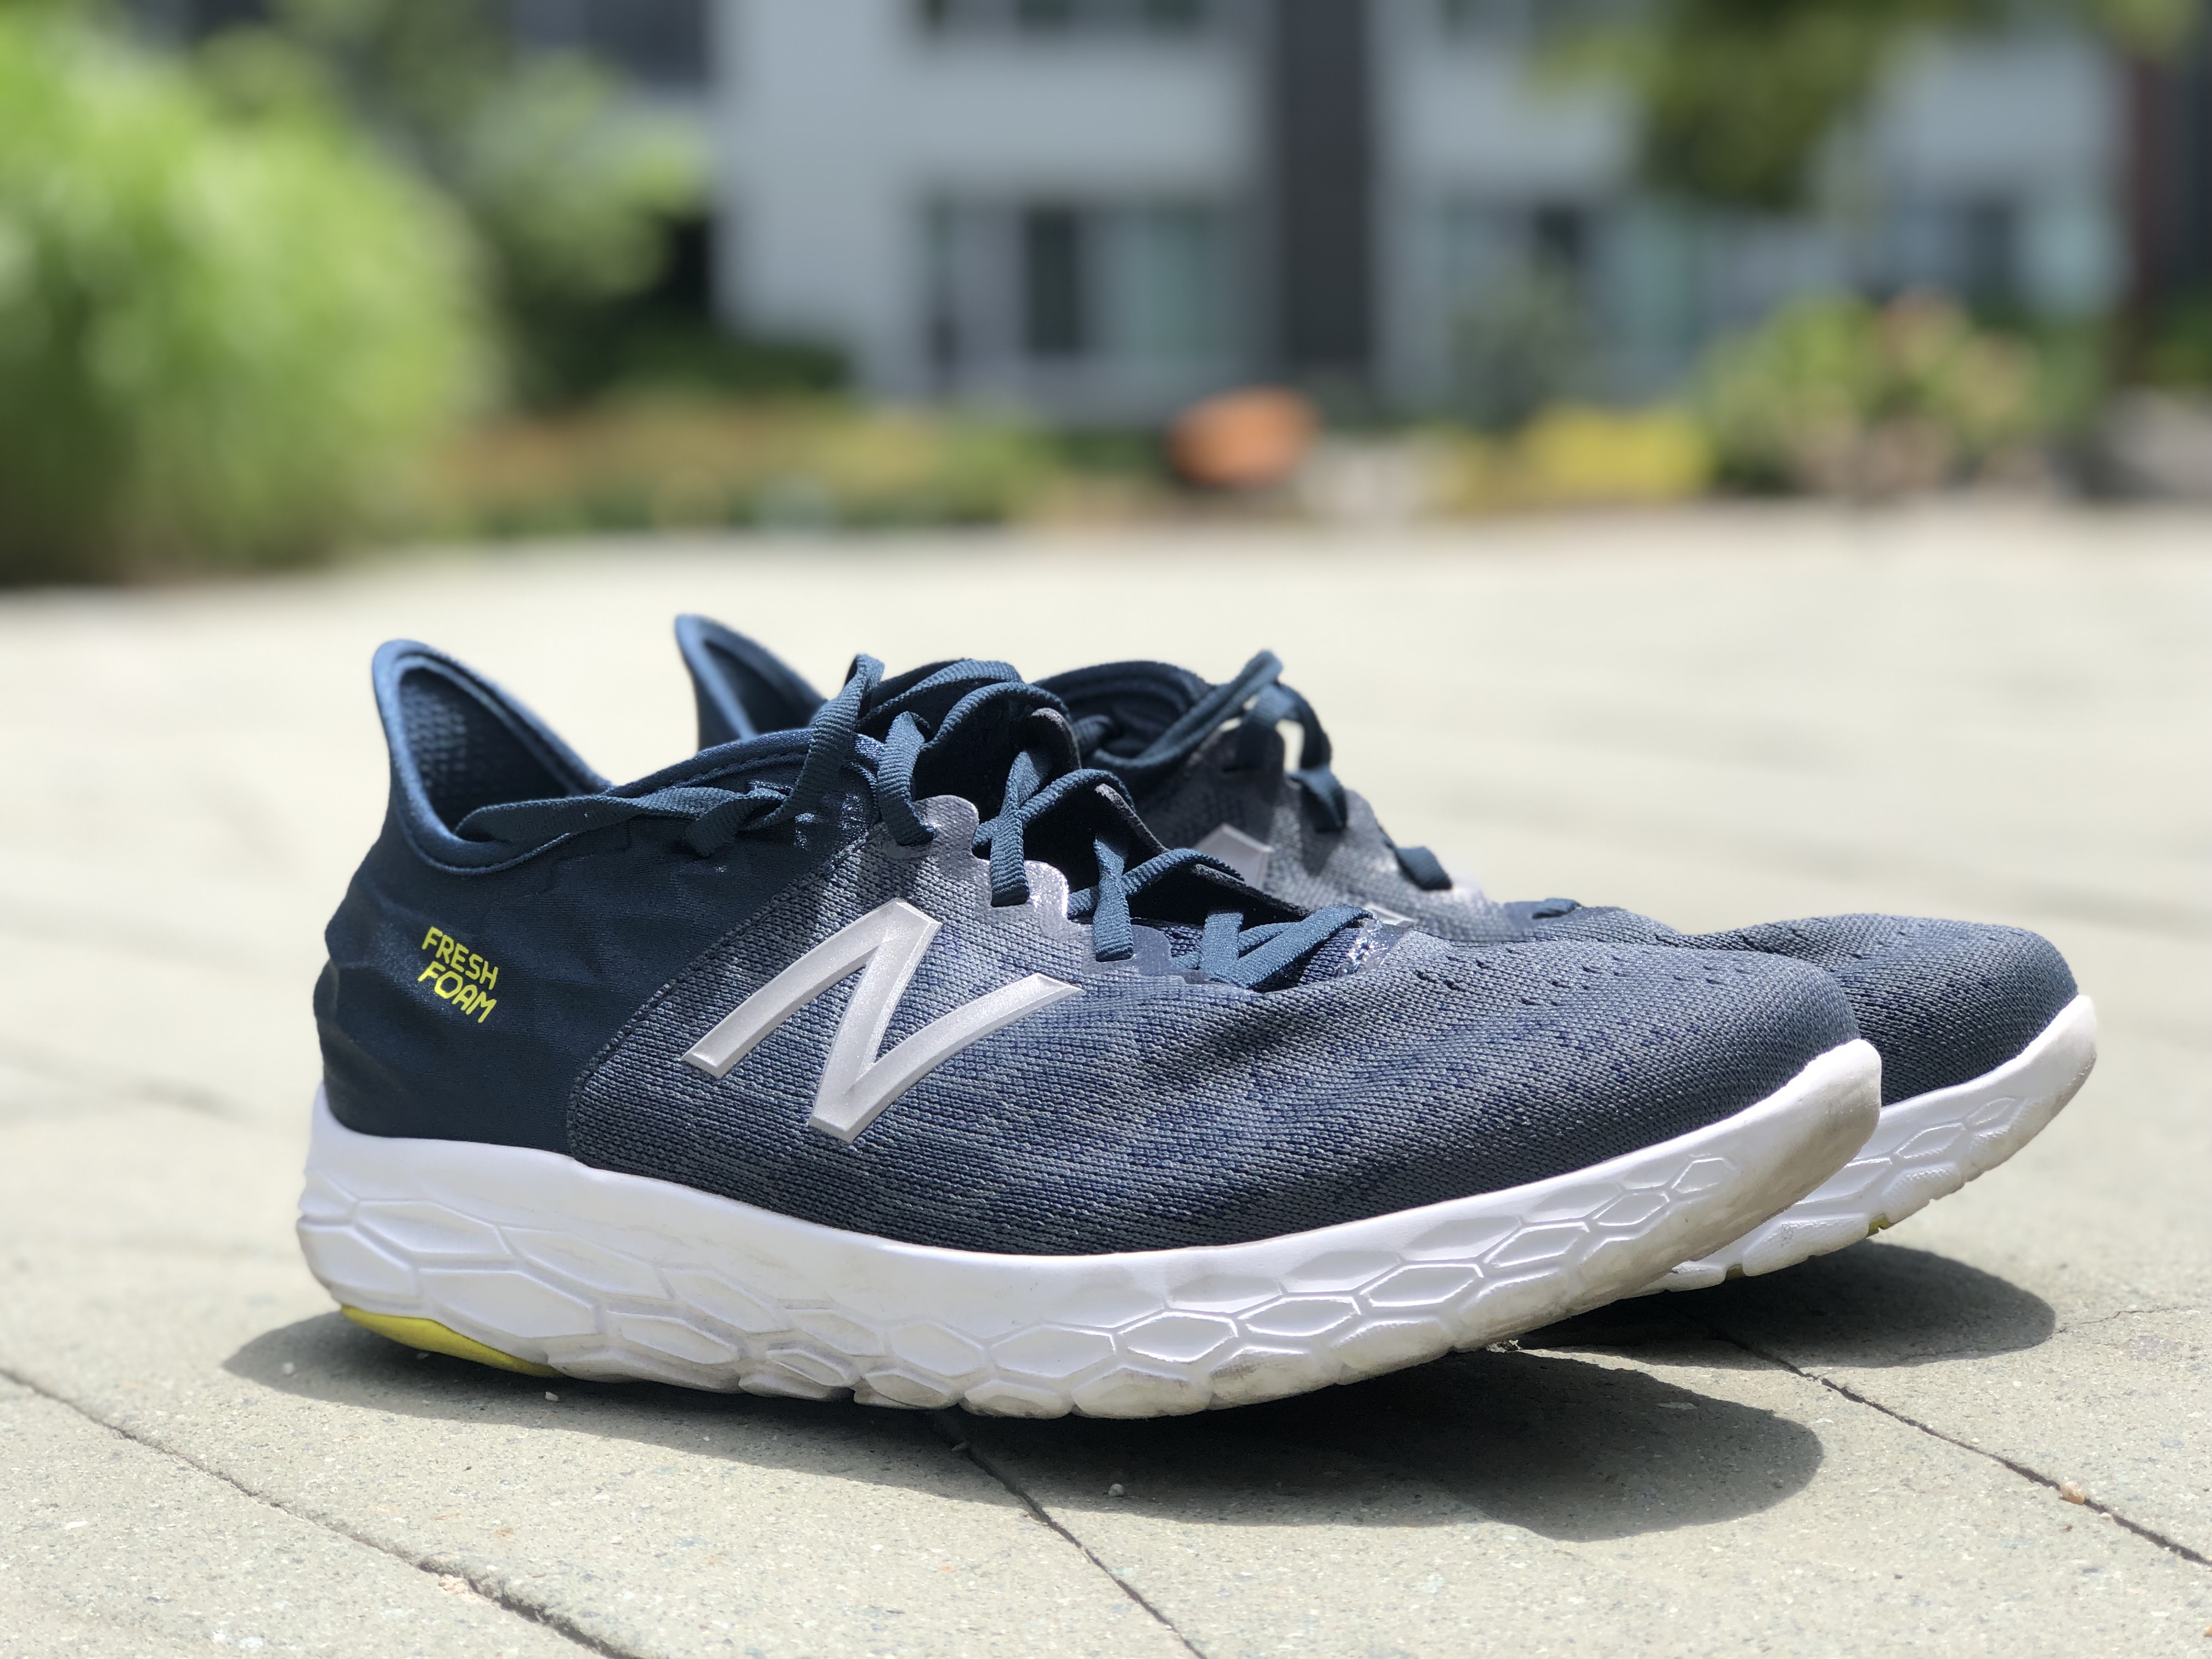 New Balance Beacon 2 Performance Review » Believe in the Run